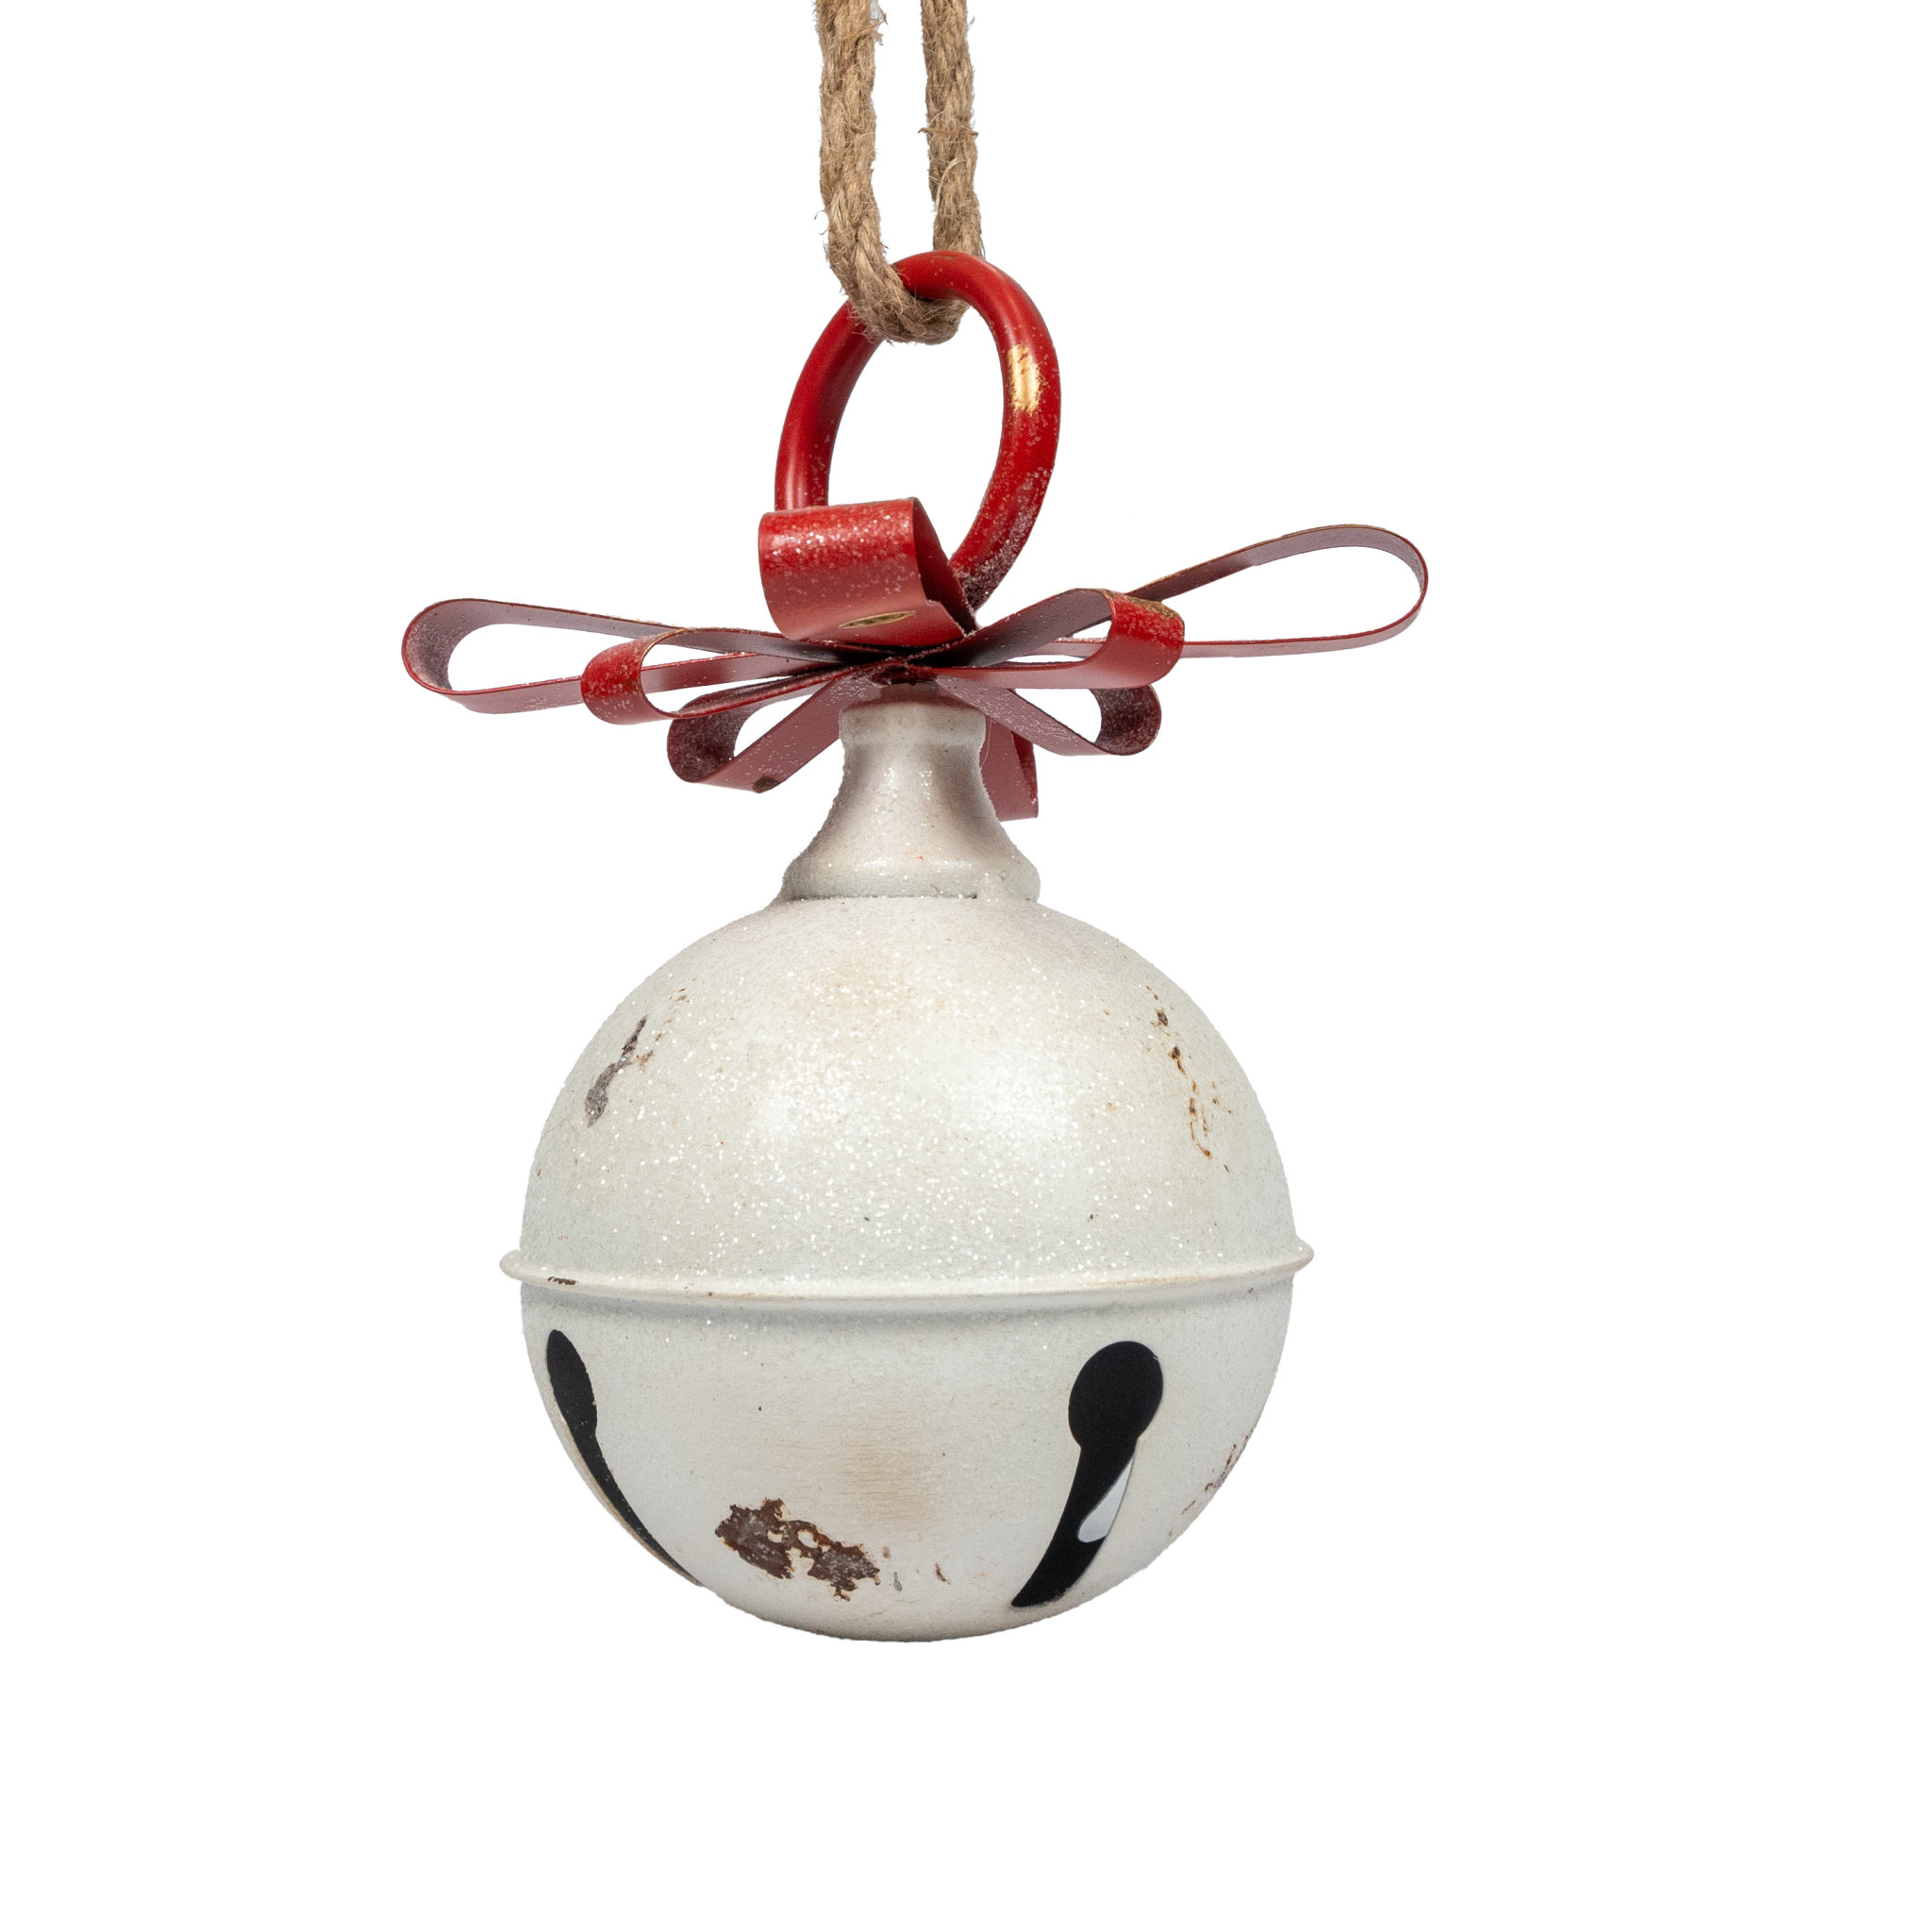 White Glittered Jingle Bell With Red Bow Ornament - 7.75"